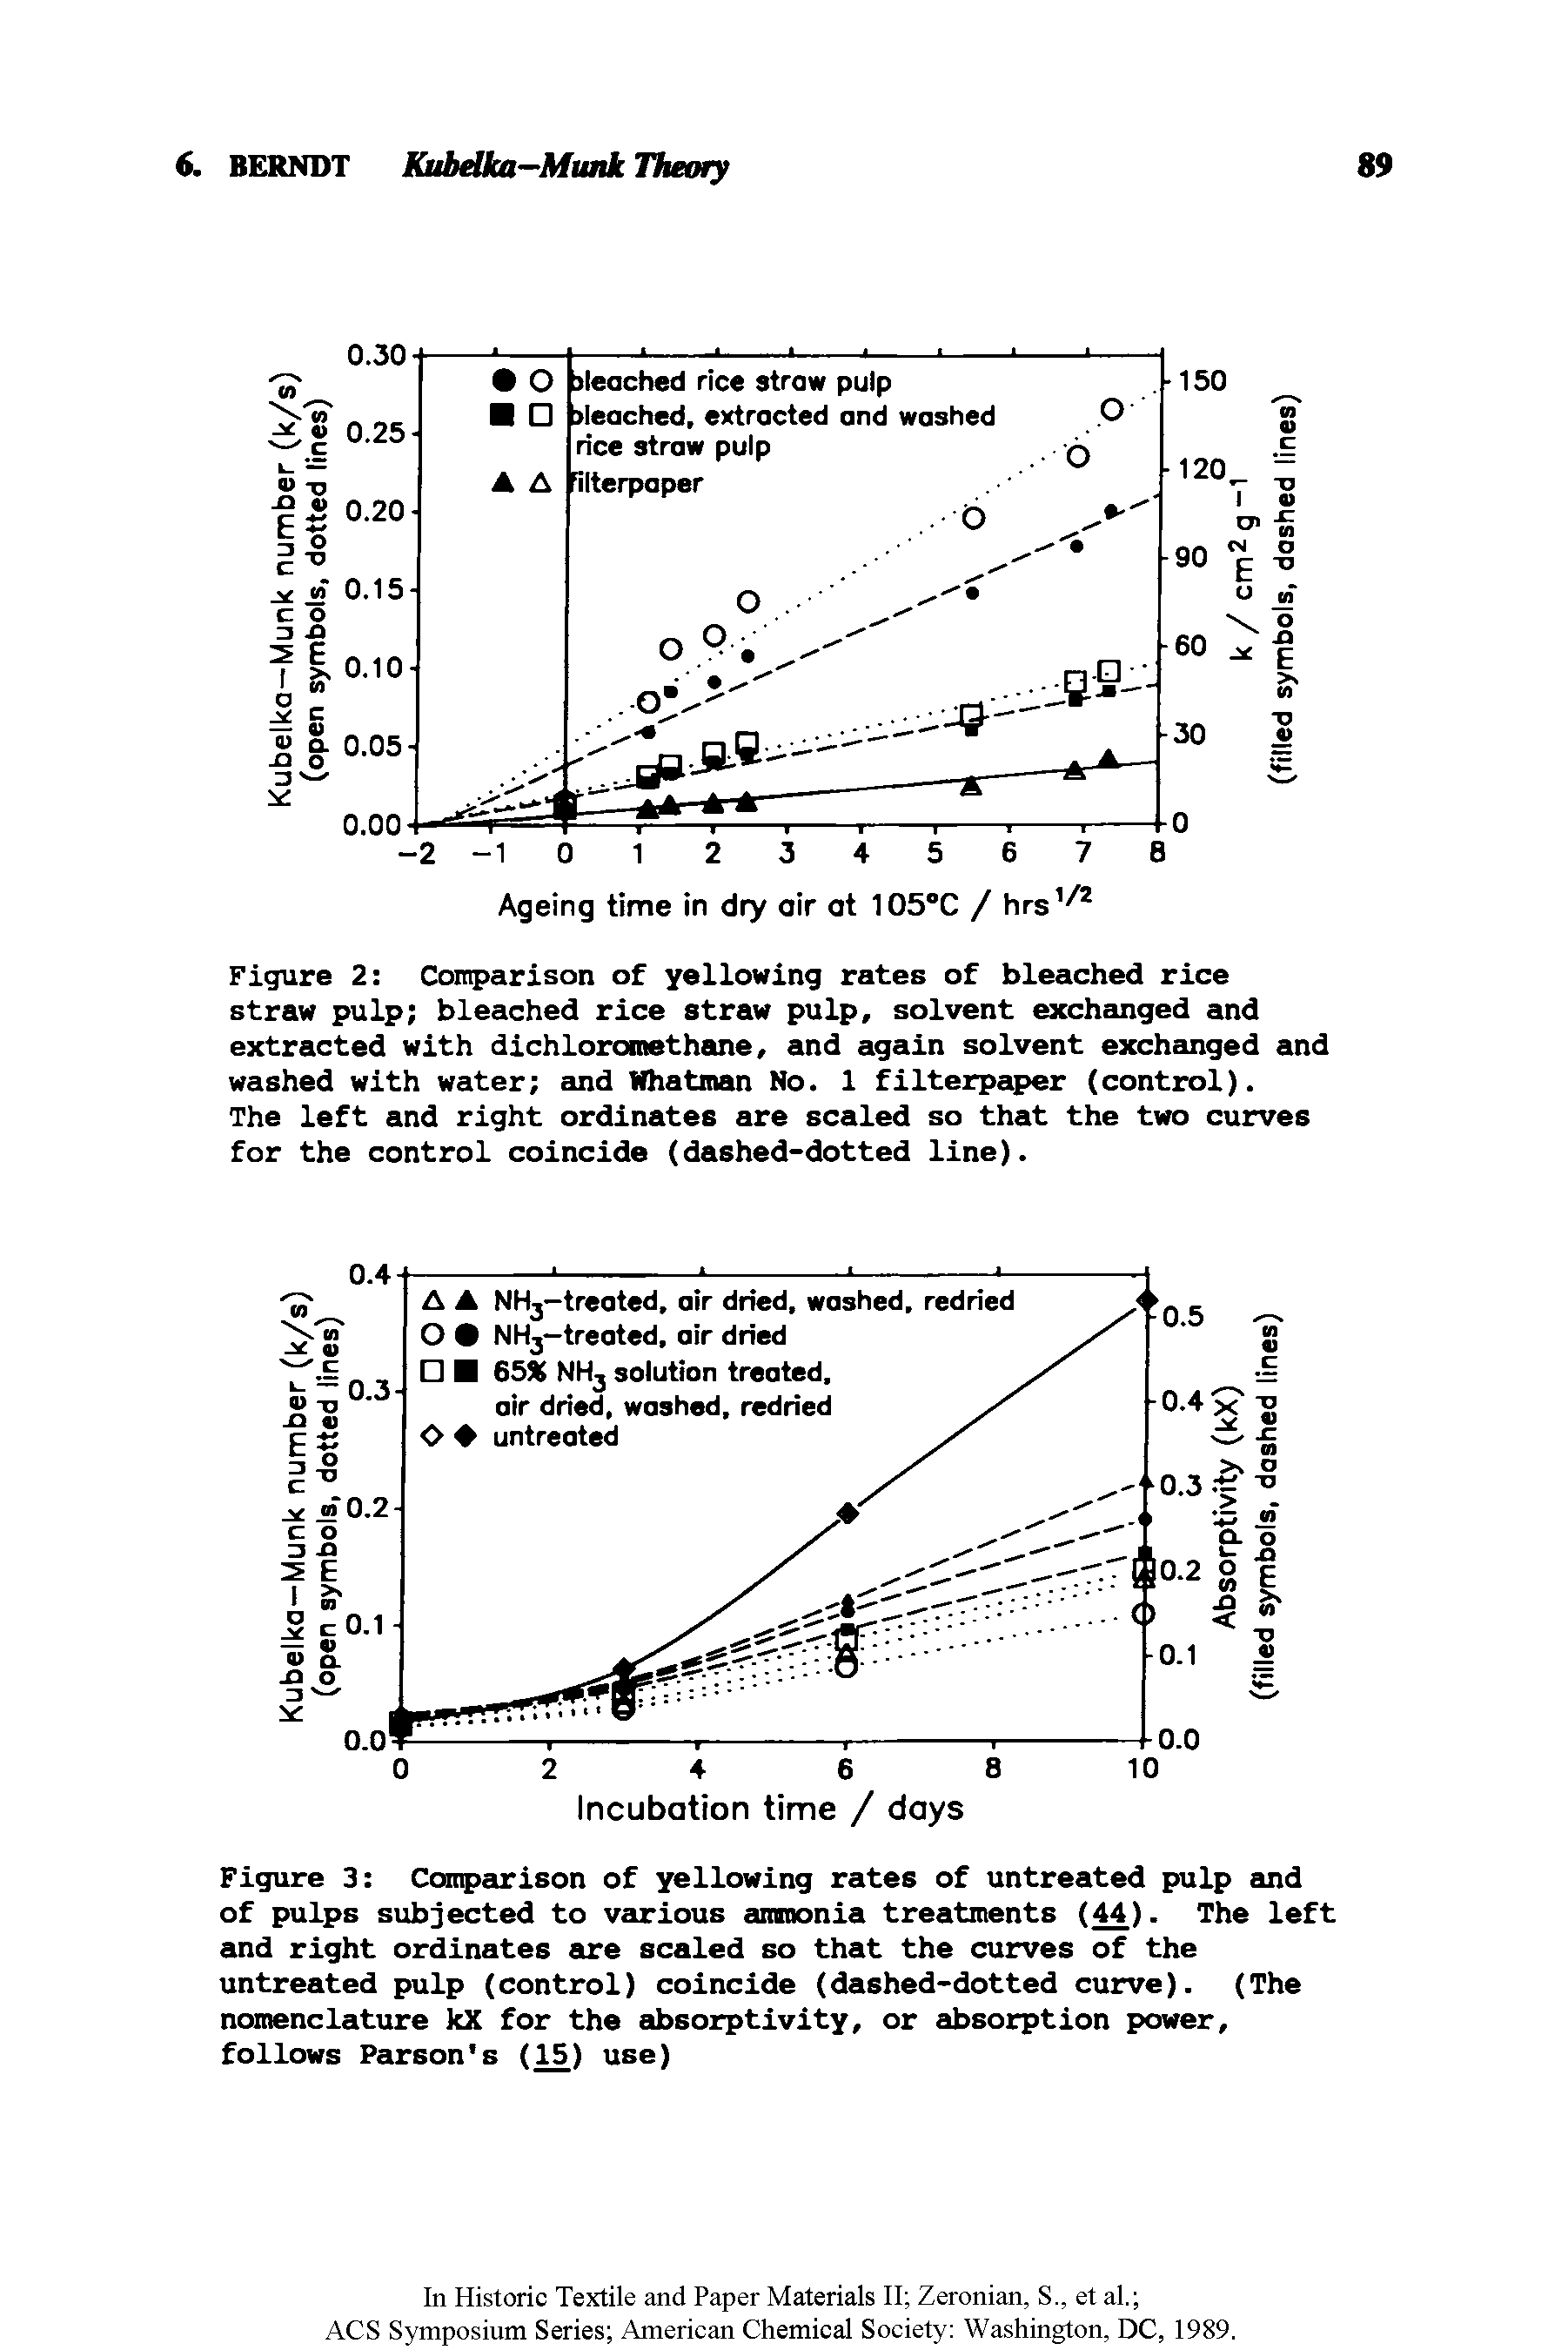 Figure 2 Comparison of yellowing rates of bleached rice straw pulp bleached rice straw pulp, solvent exchanged and extracted with dichloromethane, and again solvent exchanged and washed with water and Whatman No. 1 filterpaper (control).